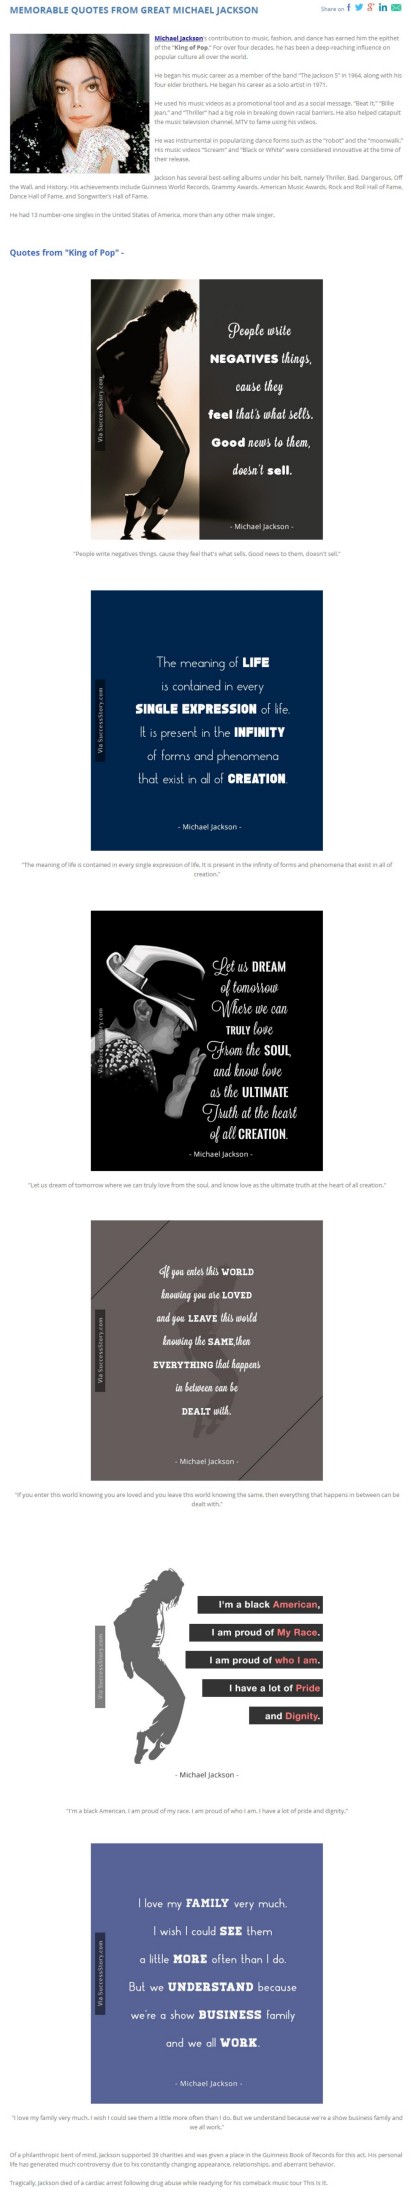 Memorable Quotes From Great Michael Jackson